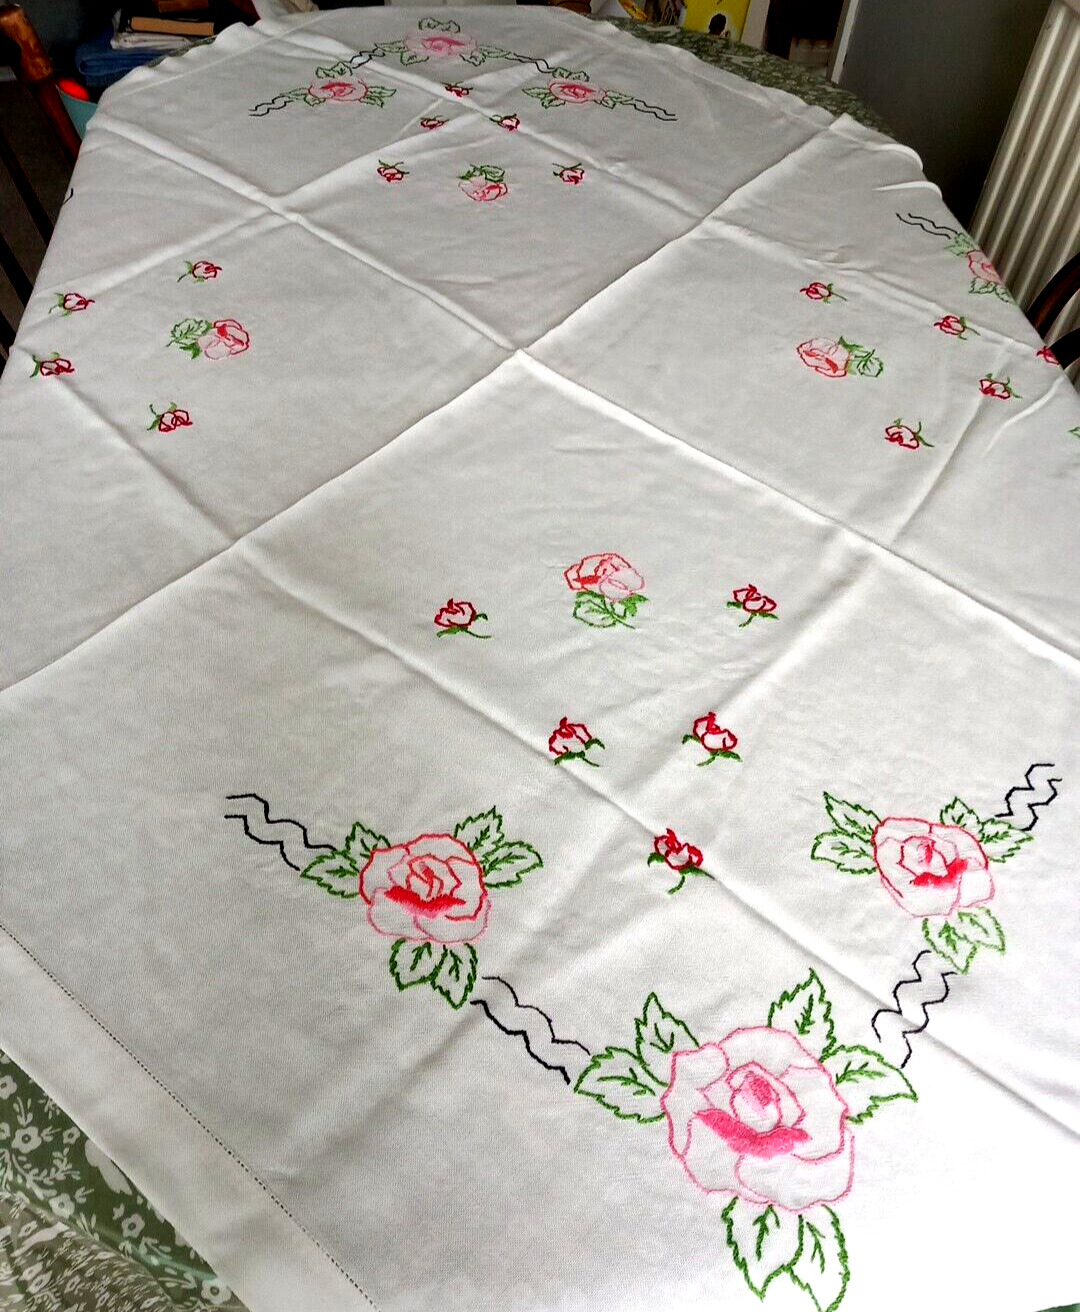 Vintage Hand Embroidered Roses Floral Tablecloth 44” x 48” VGC